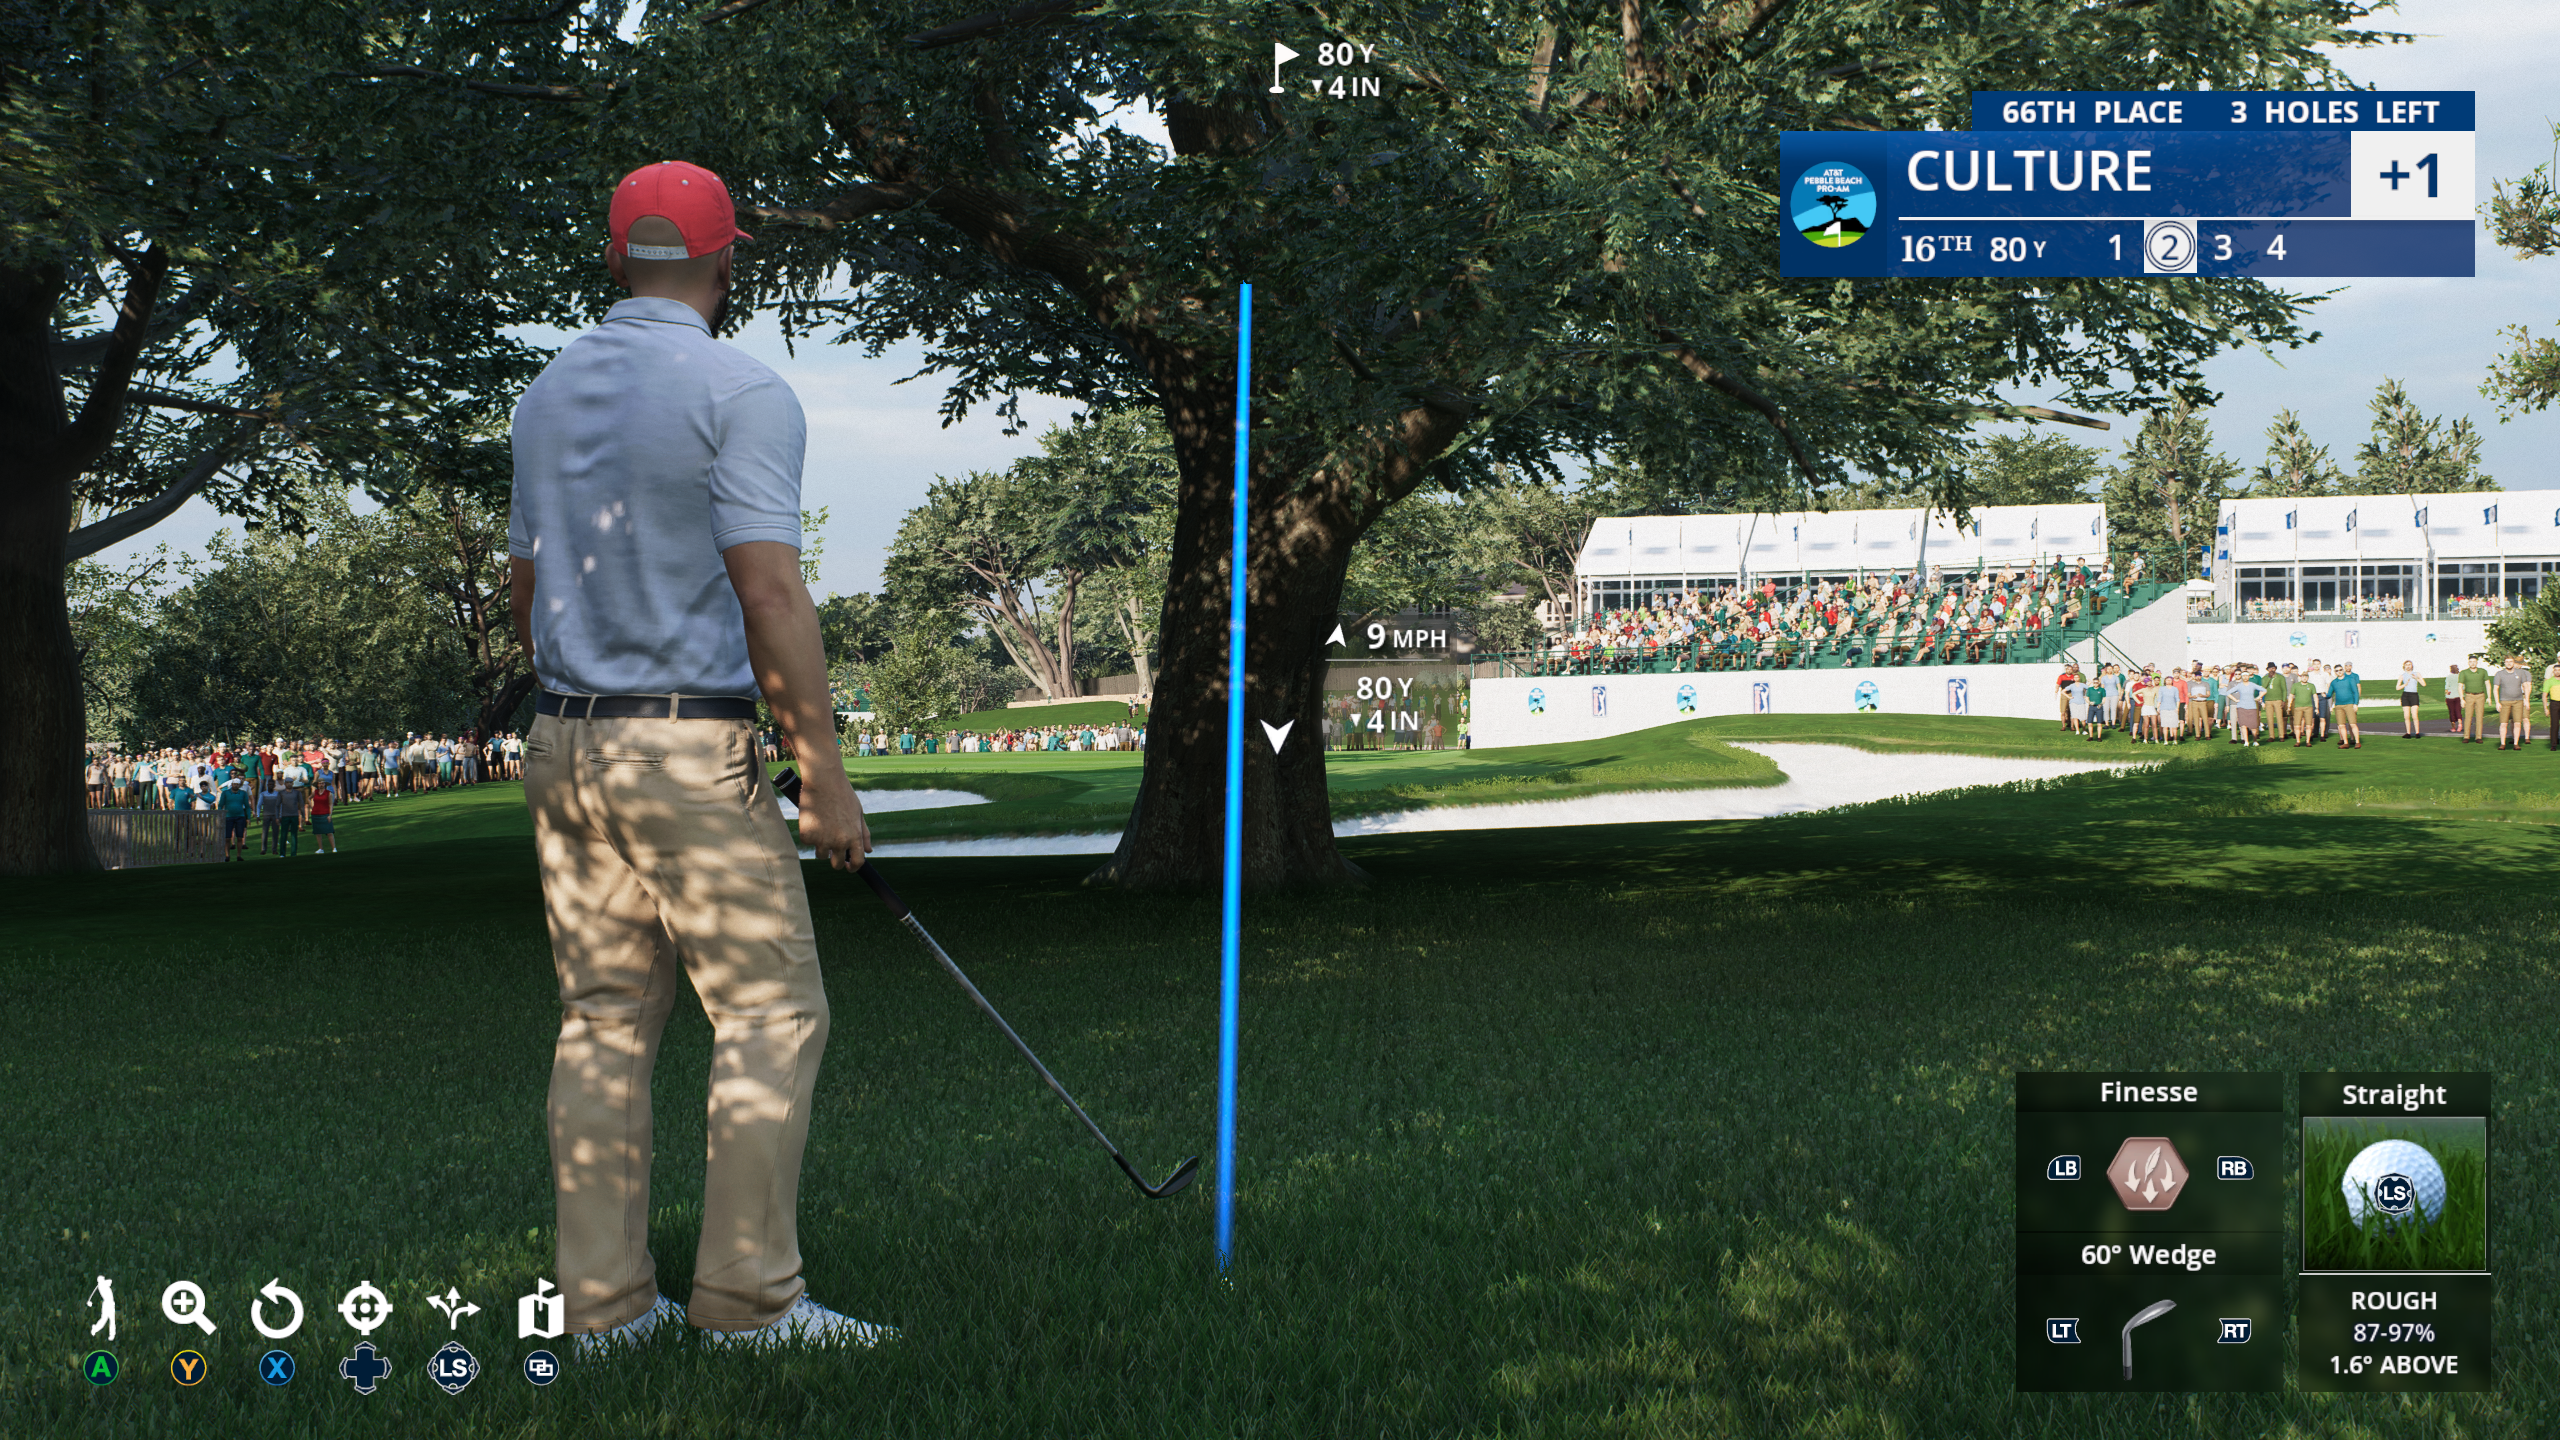 our golfer standing over a shot behind a tree. The shot arc shows the ball striking the tree